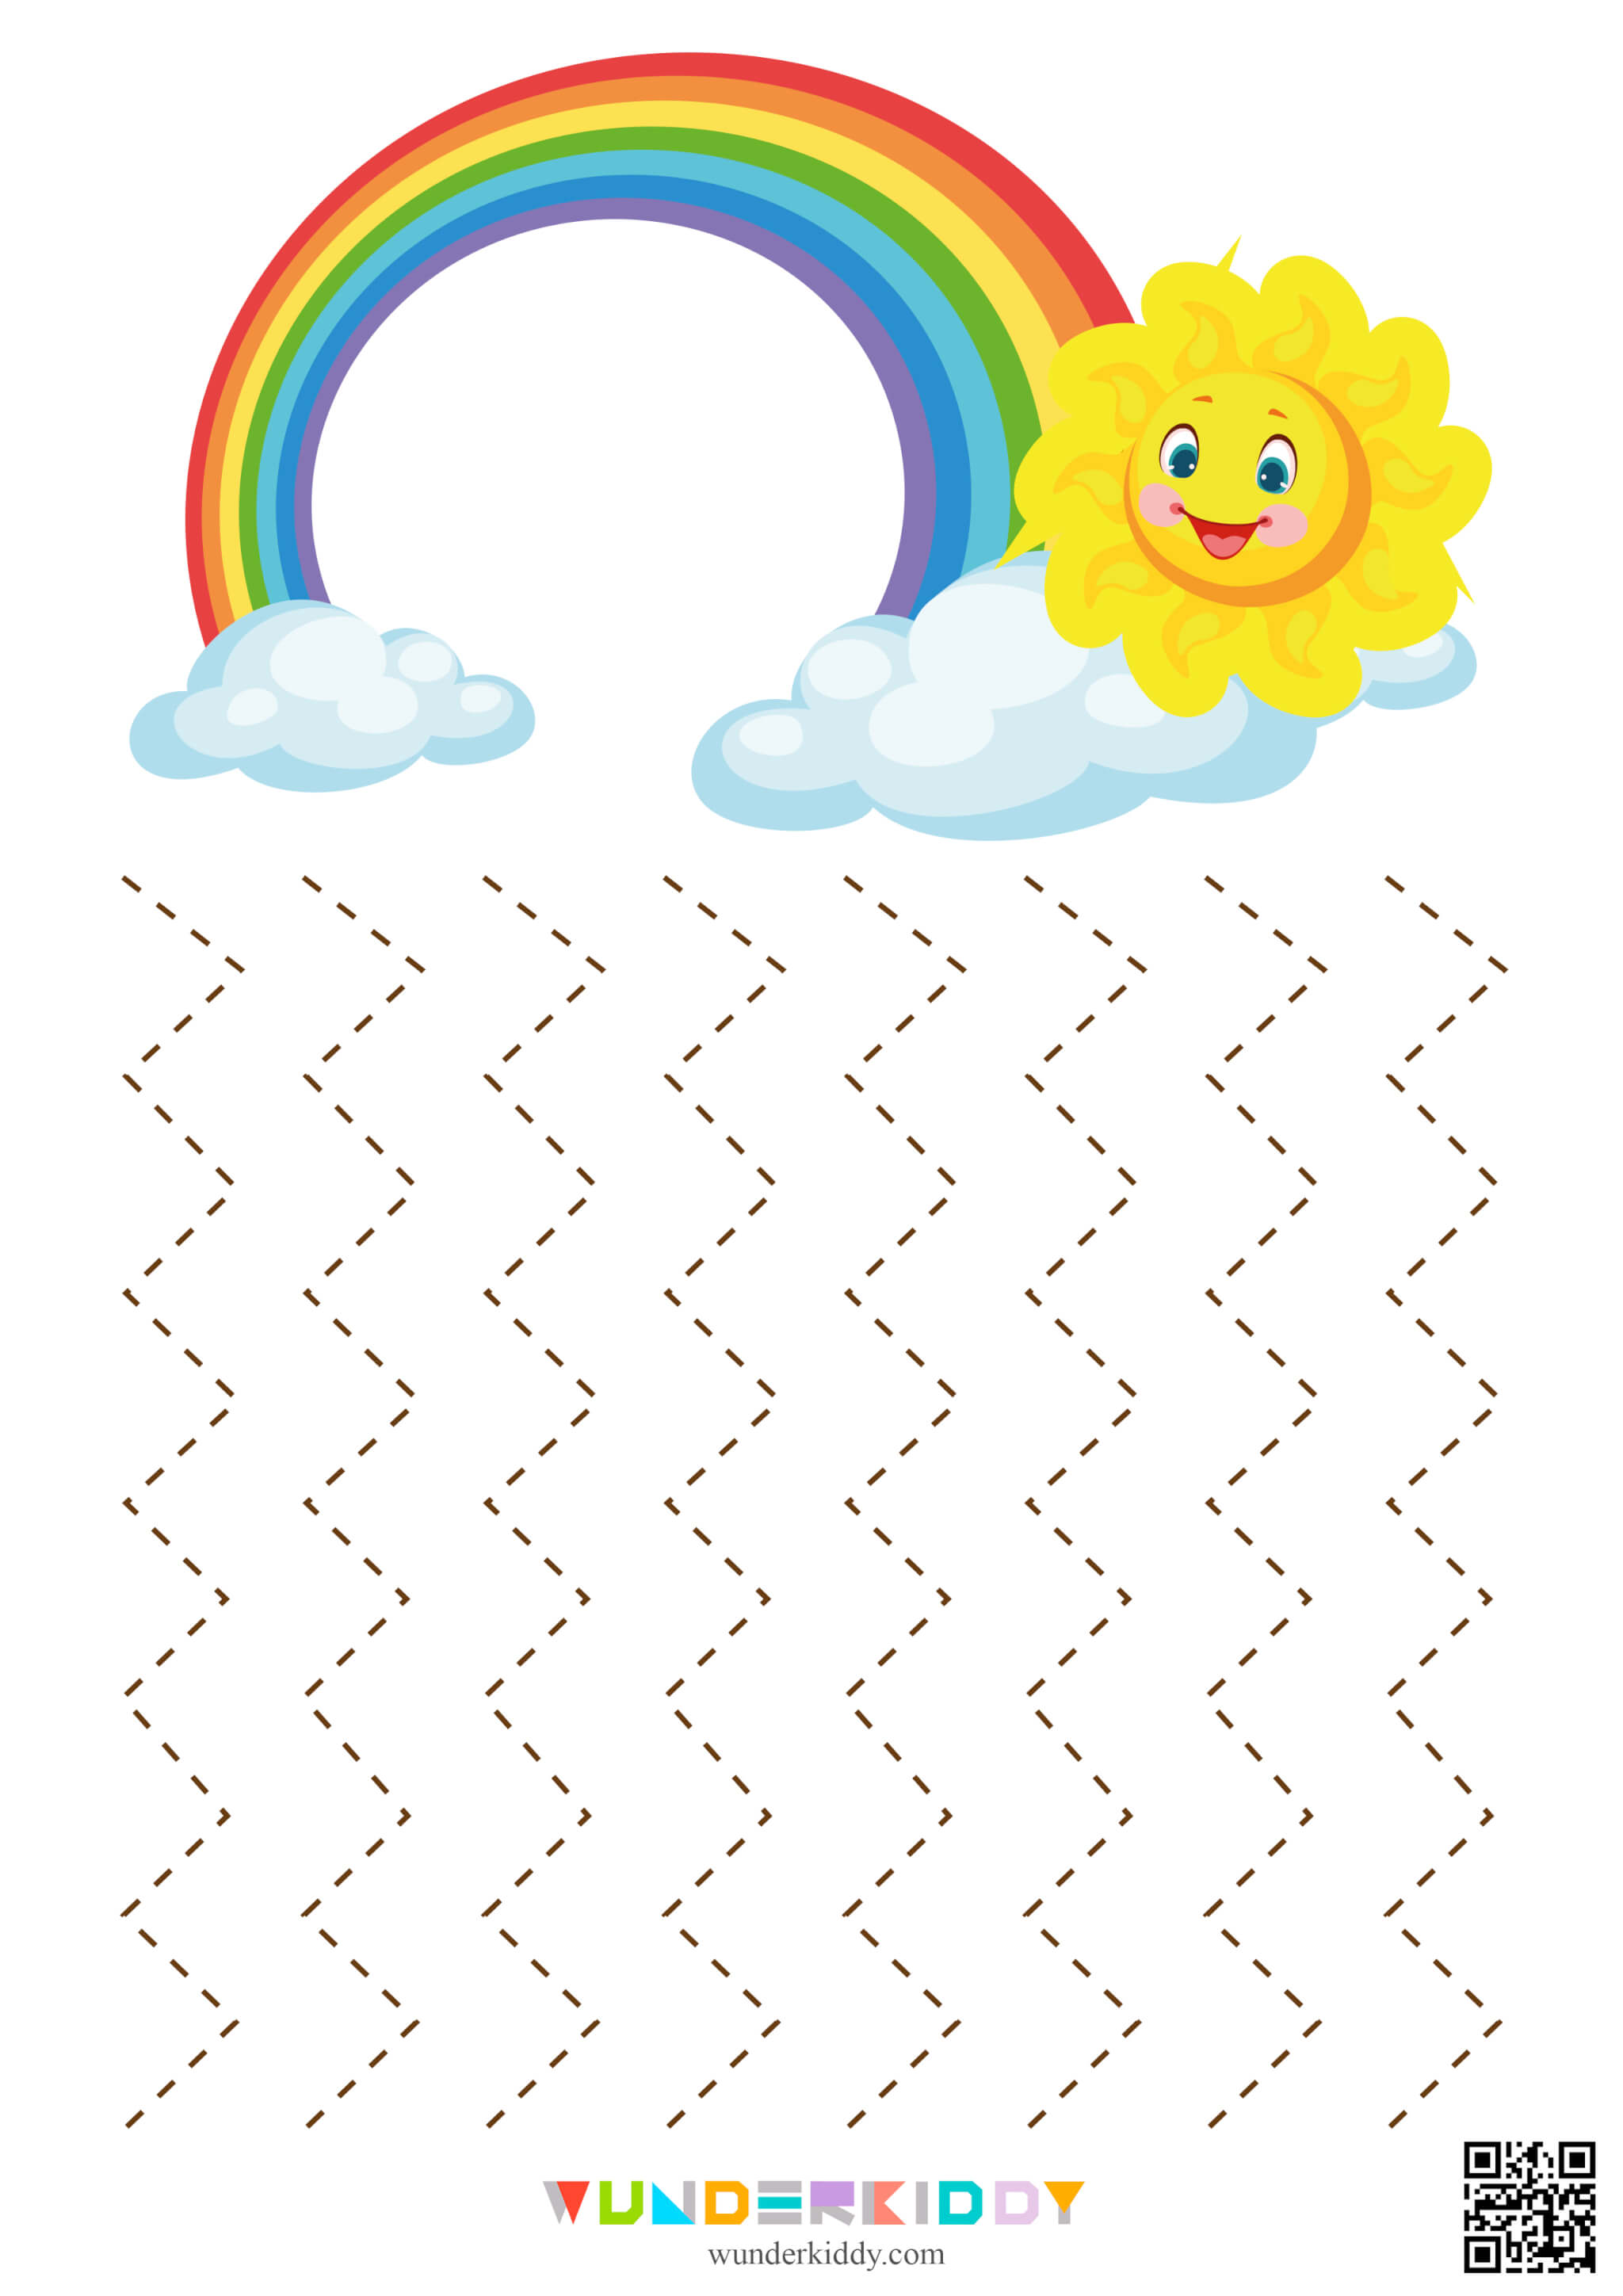 Worksheets «Sun and rainbow» - Image 6